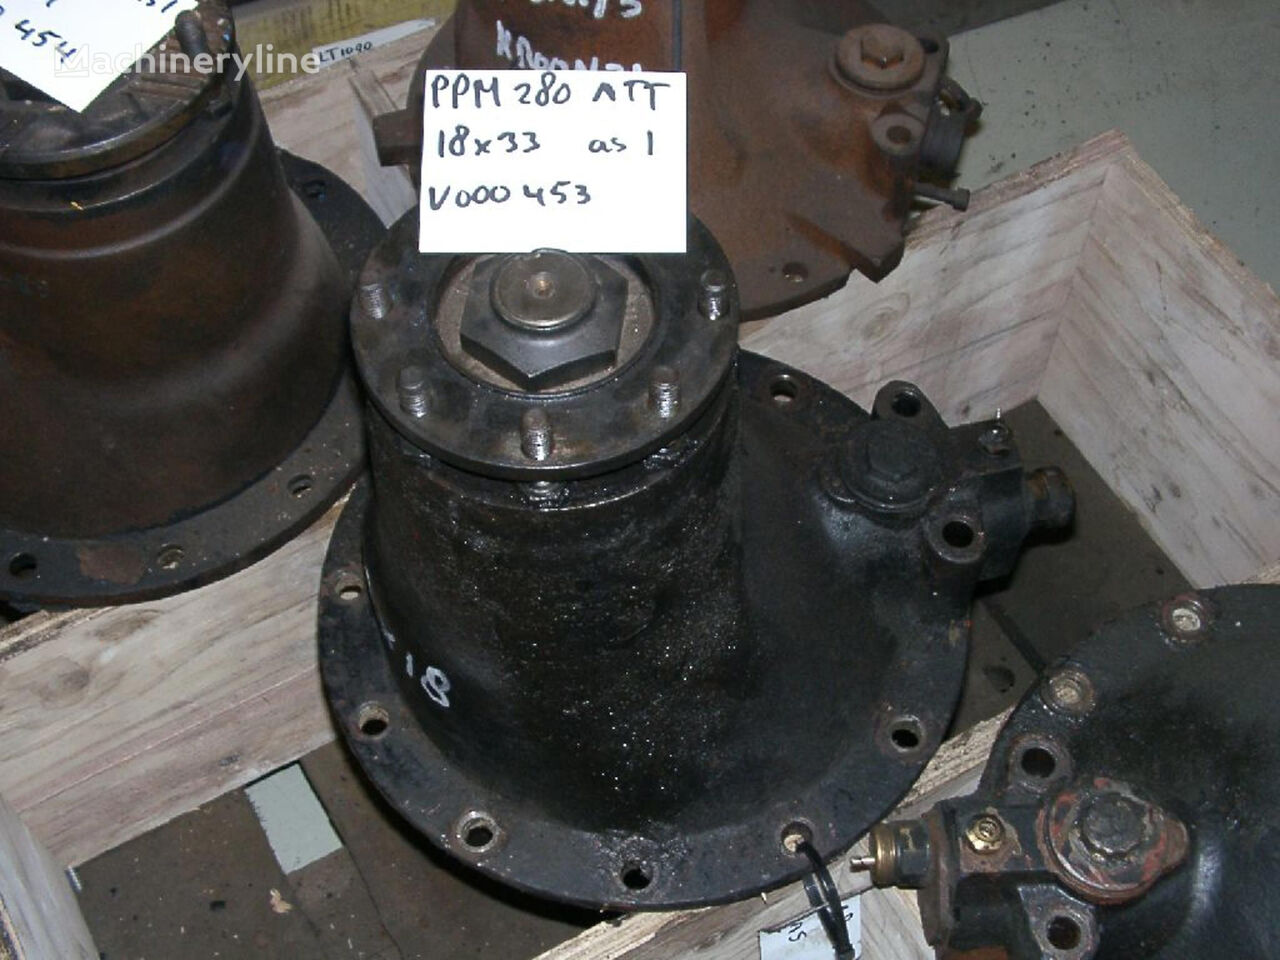 Kessler Demag AC 25 end differential small axle 1 18x33 for Demag AC 25 mobile crane